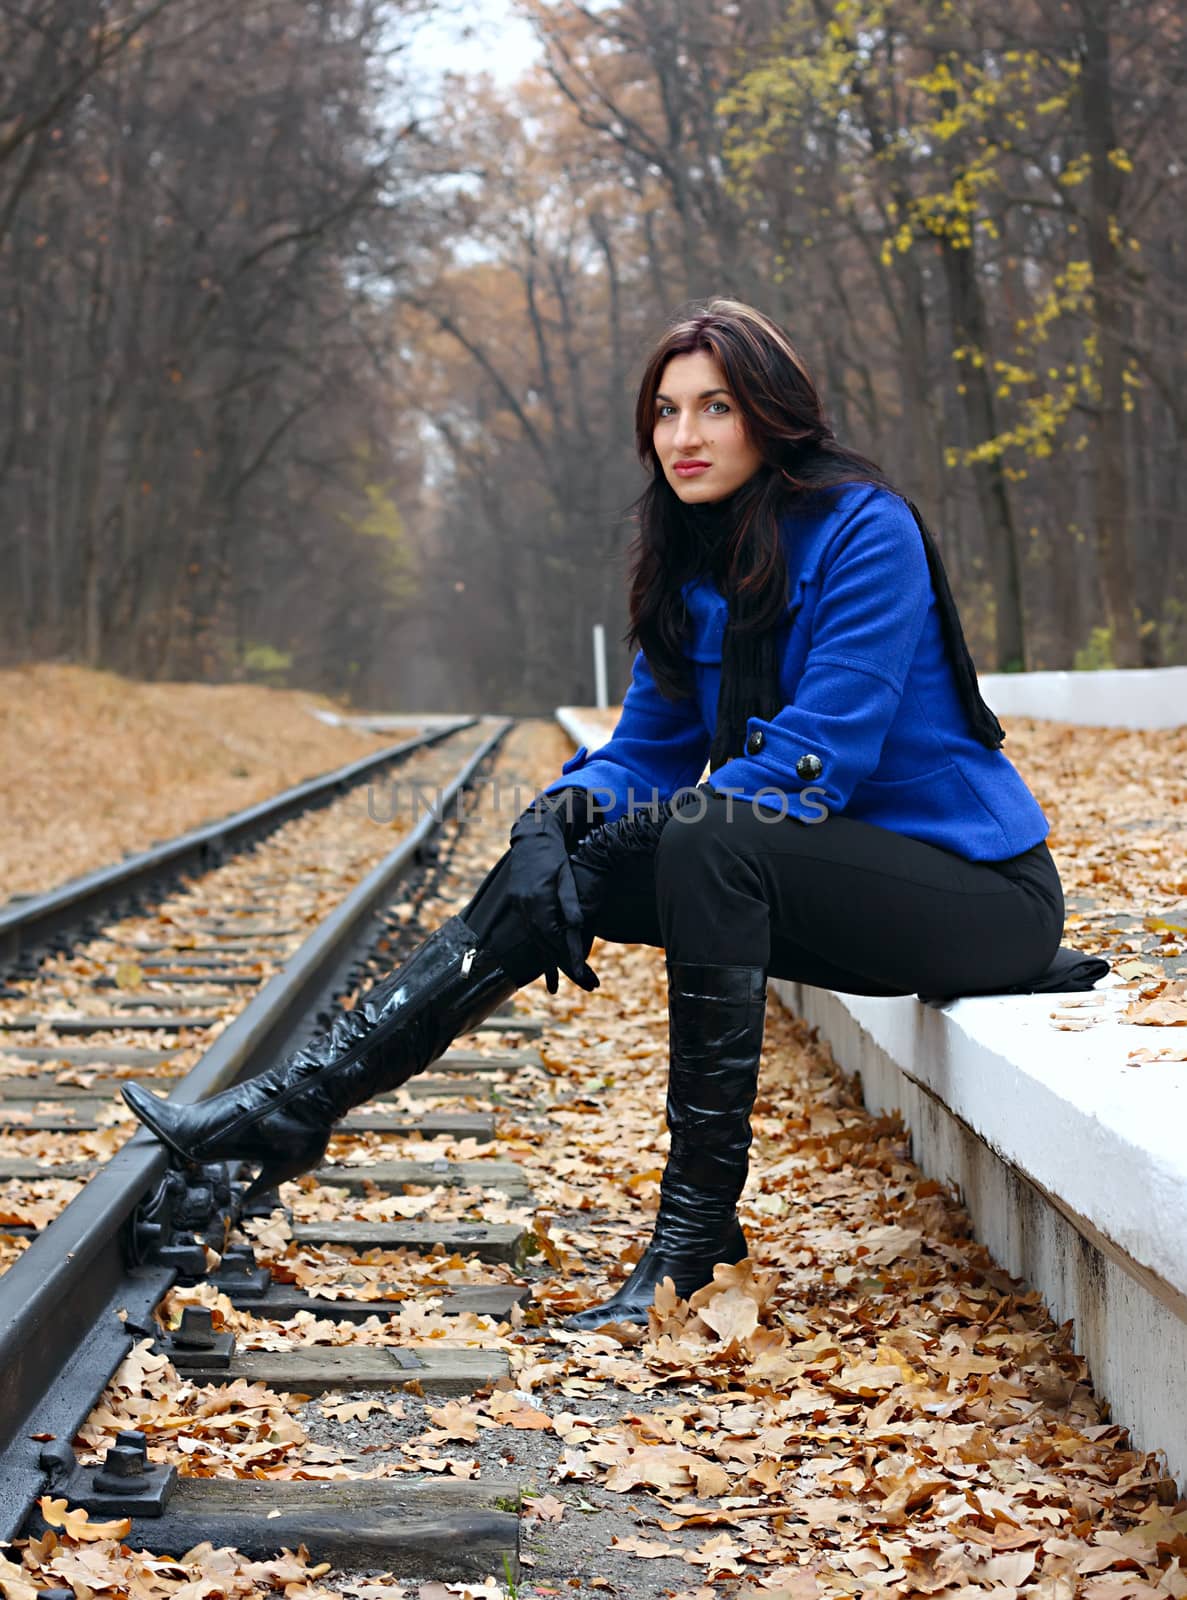 Young woman near the rails in the autumn forest